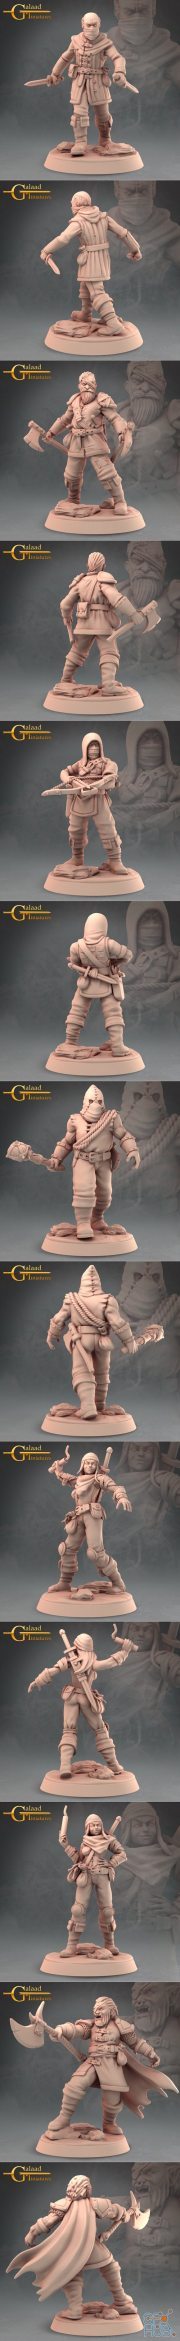 Into The Woods - Bandits – 3D Print